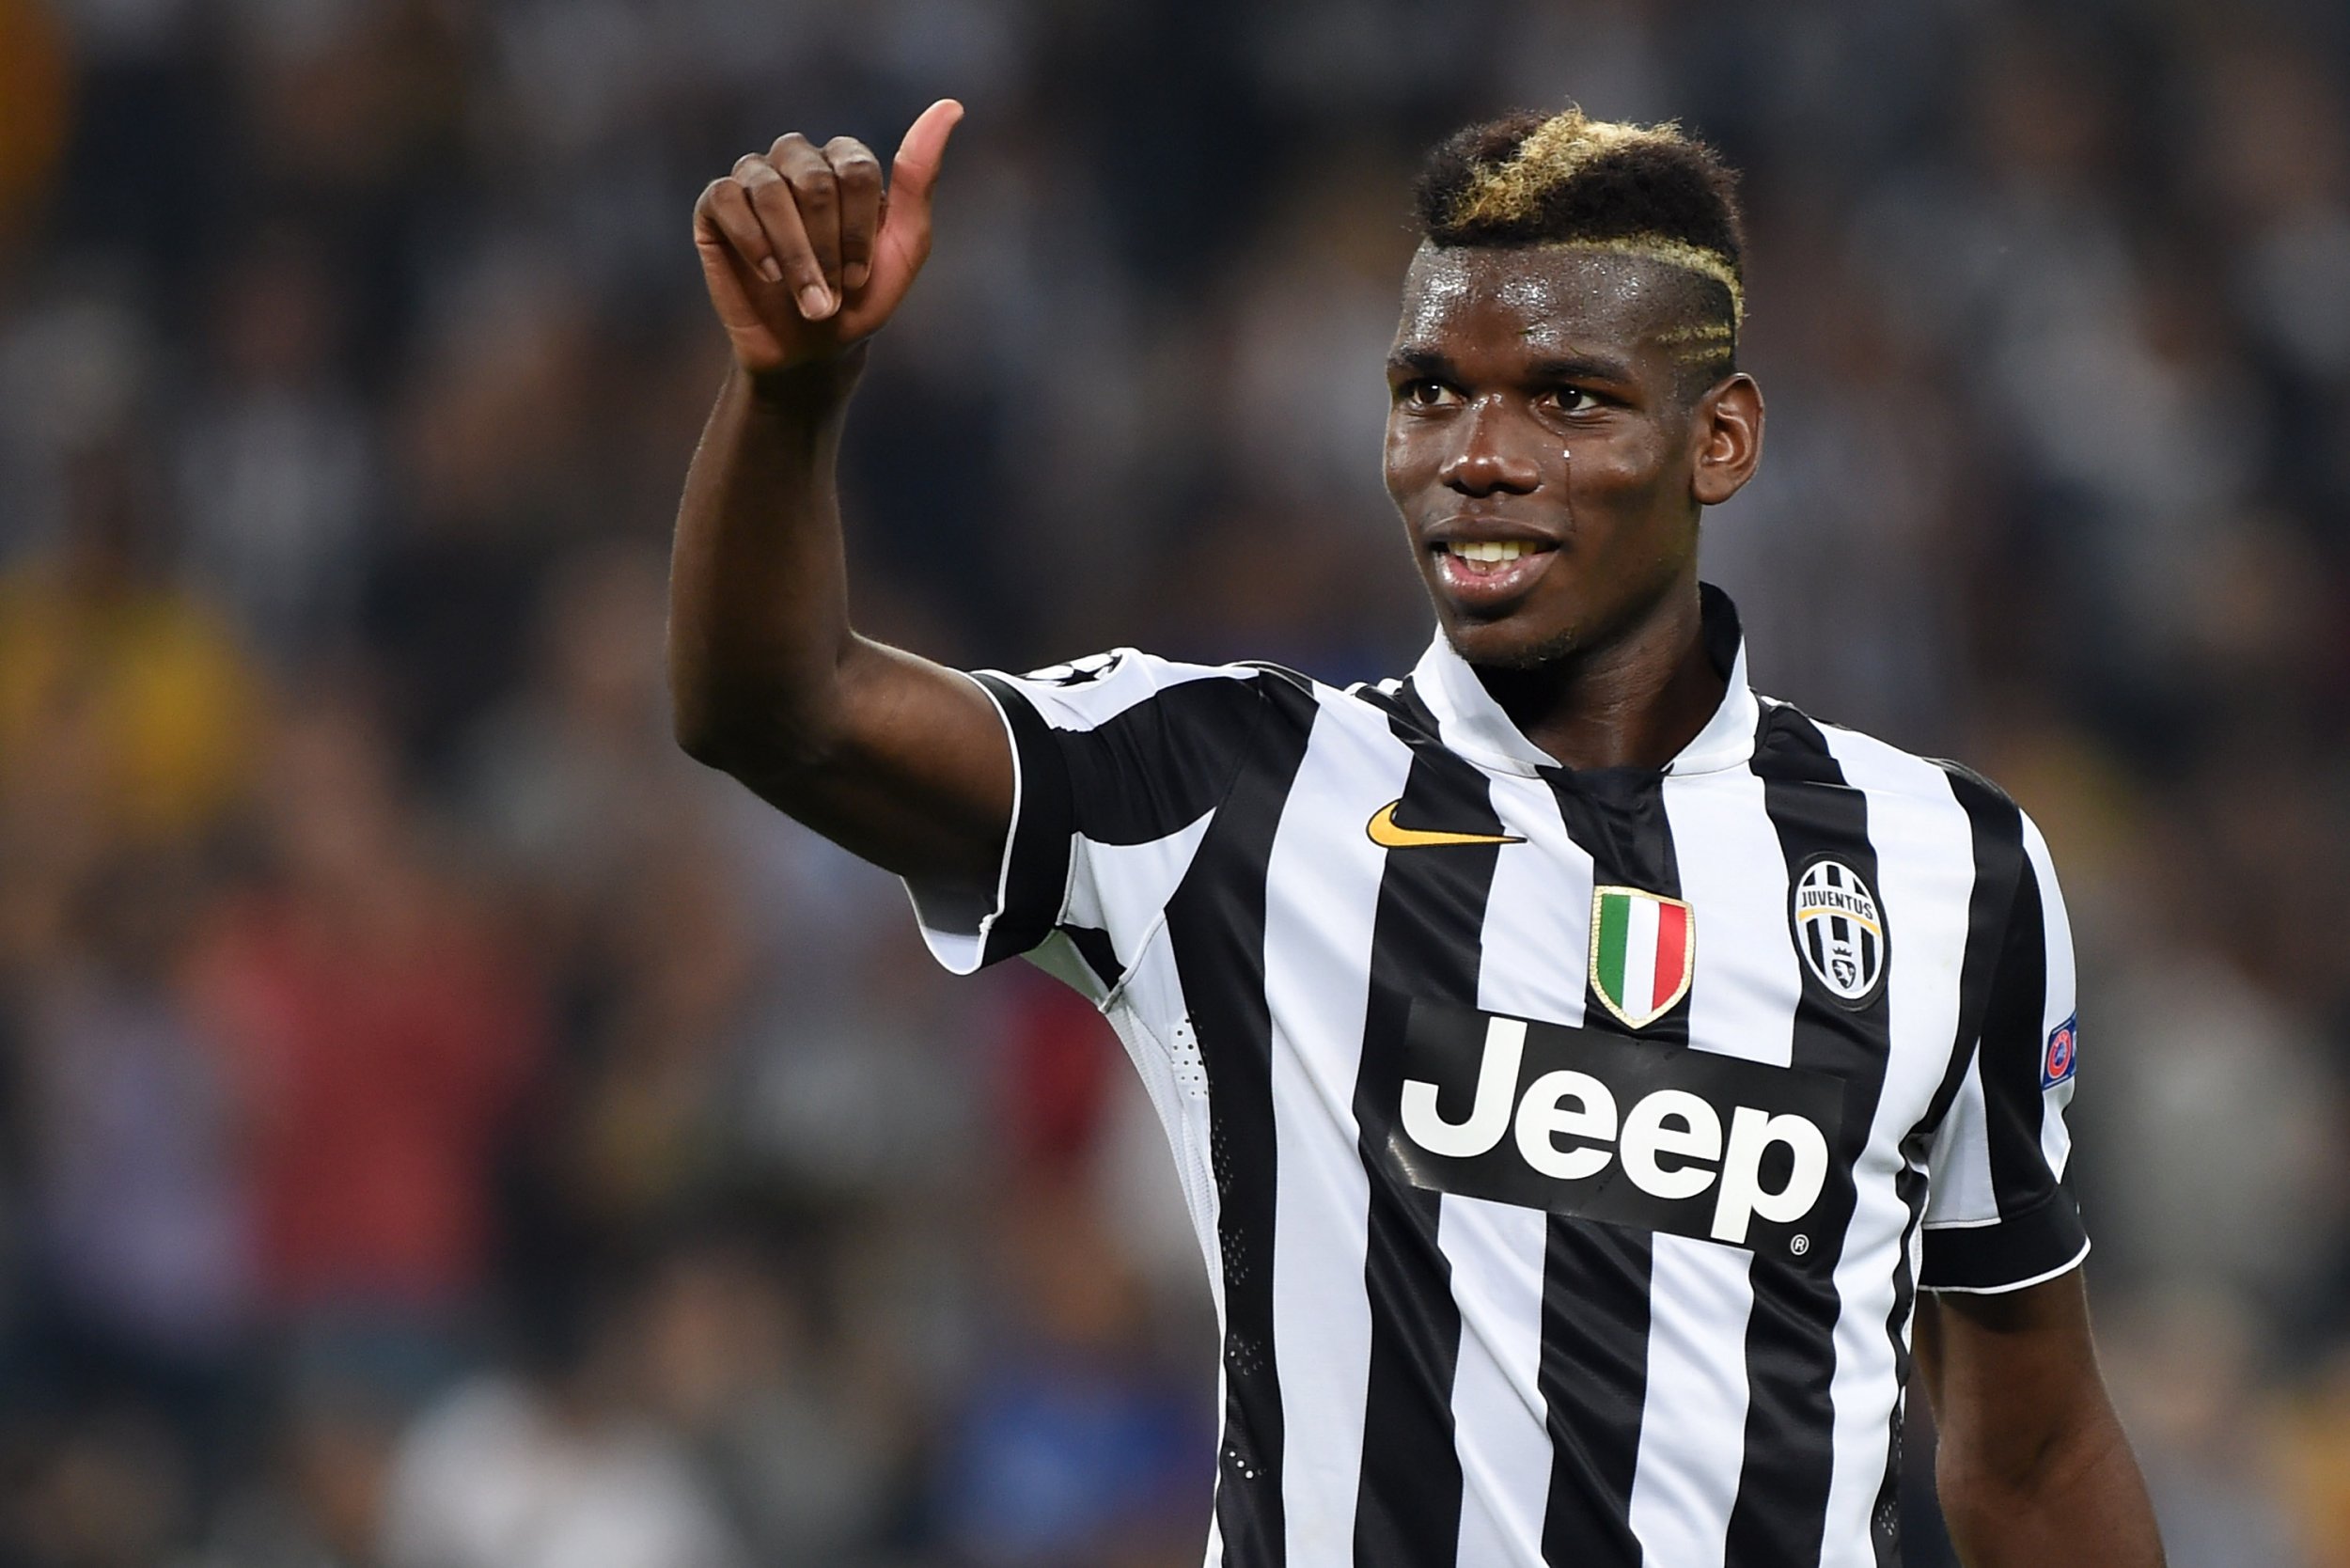 Paul Pogba left Manchester United to join Juventus on a free transfer only to come back at United as the most expensive transfer in Premier League history | SportzPoint